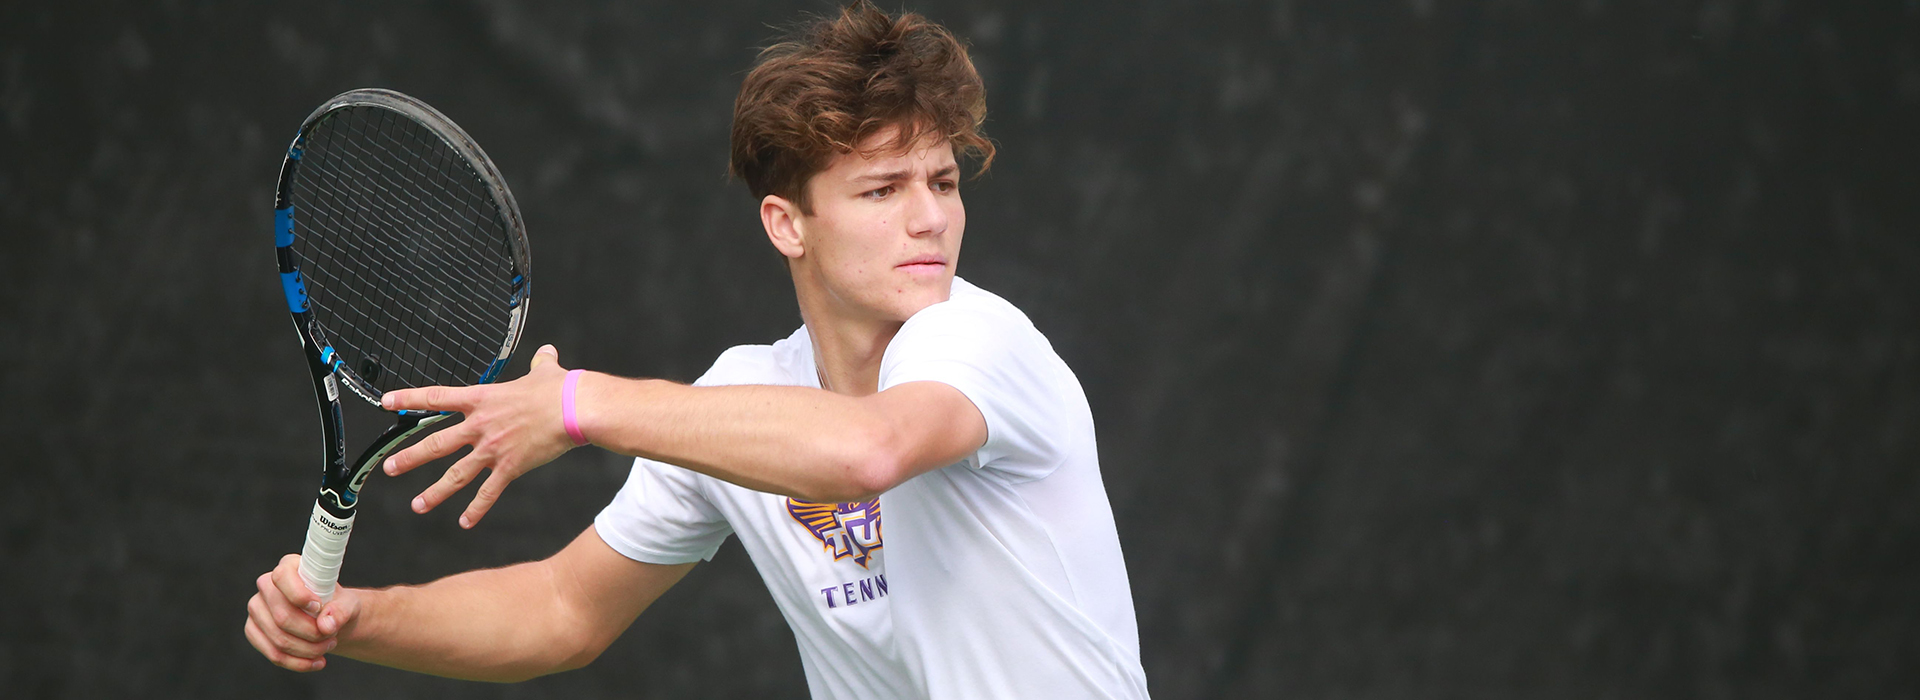 Tech tennis eyes third straight win with Tuesday trip to Chattanooga